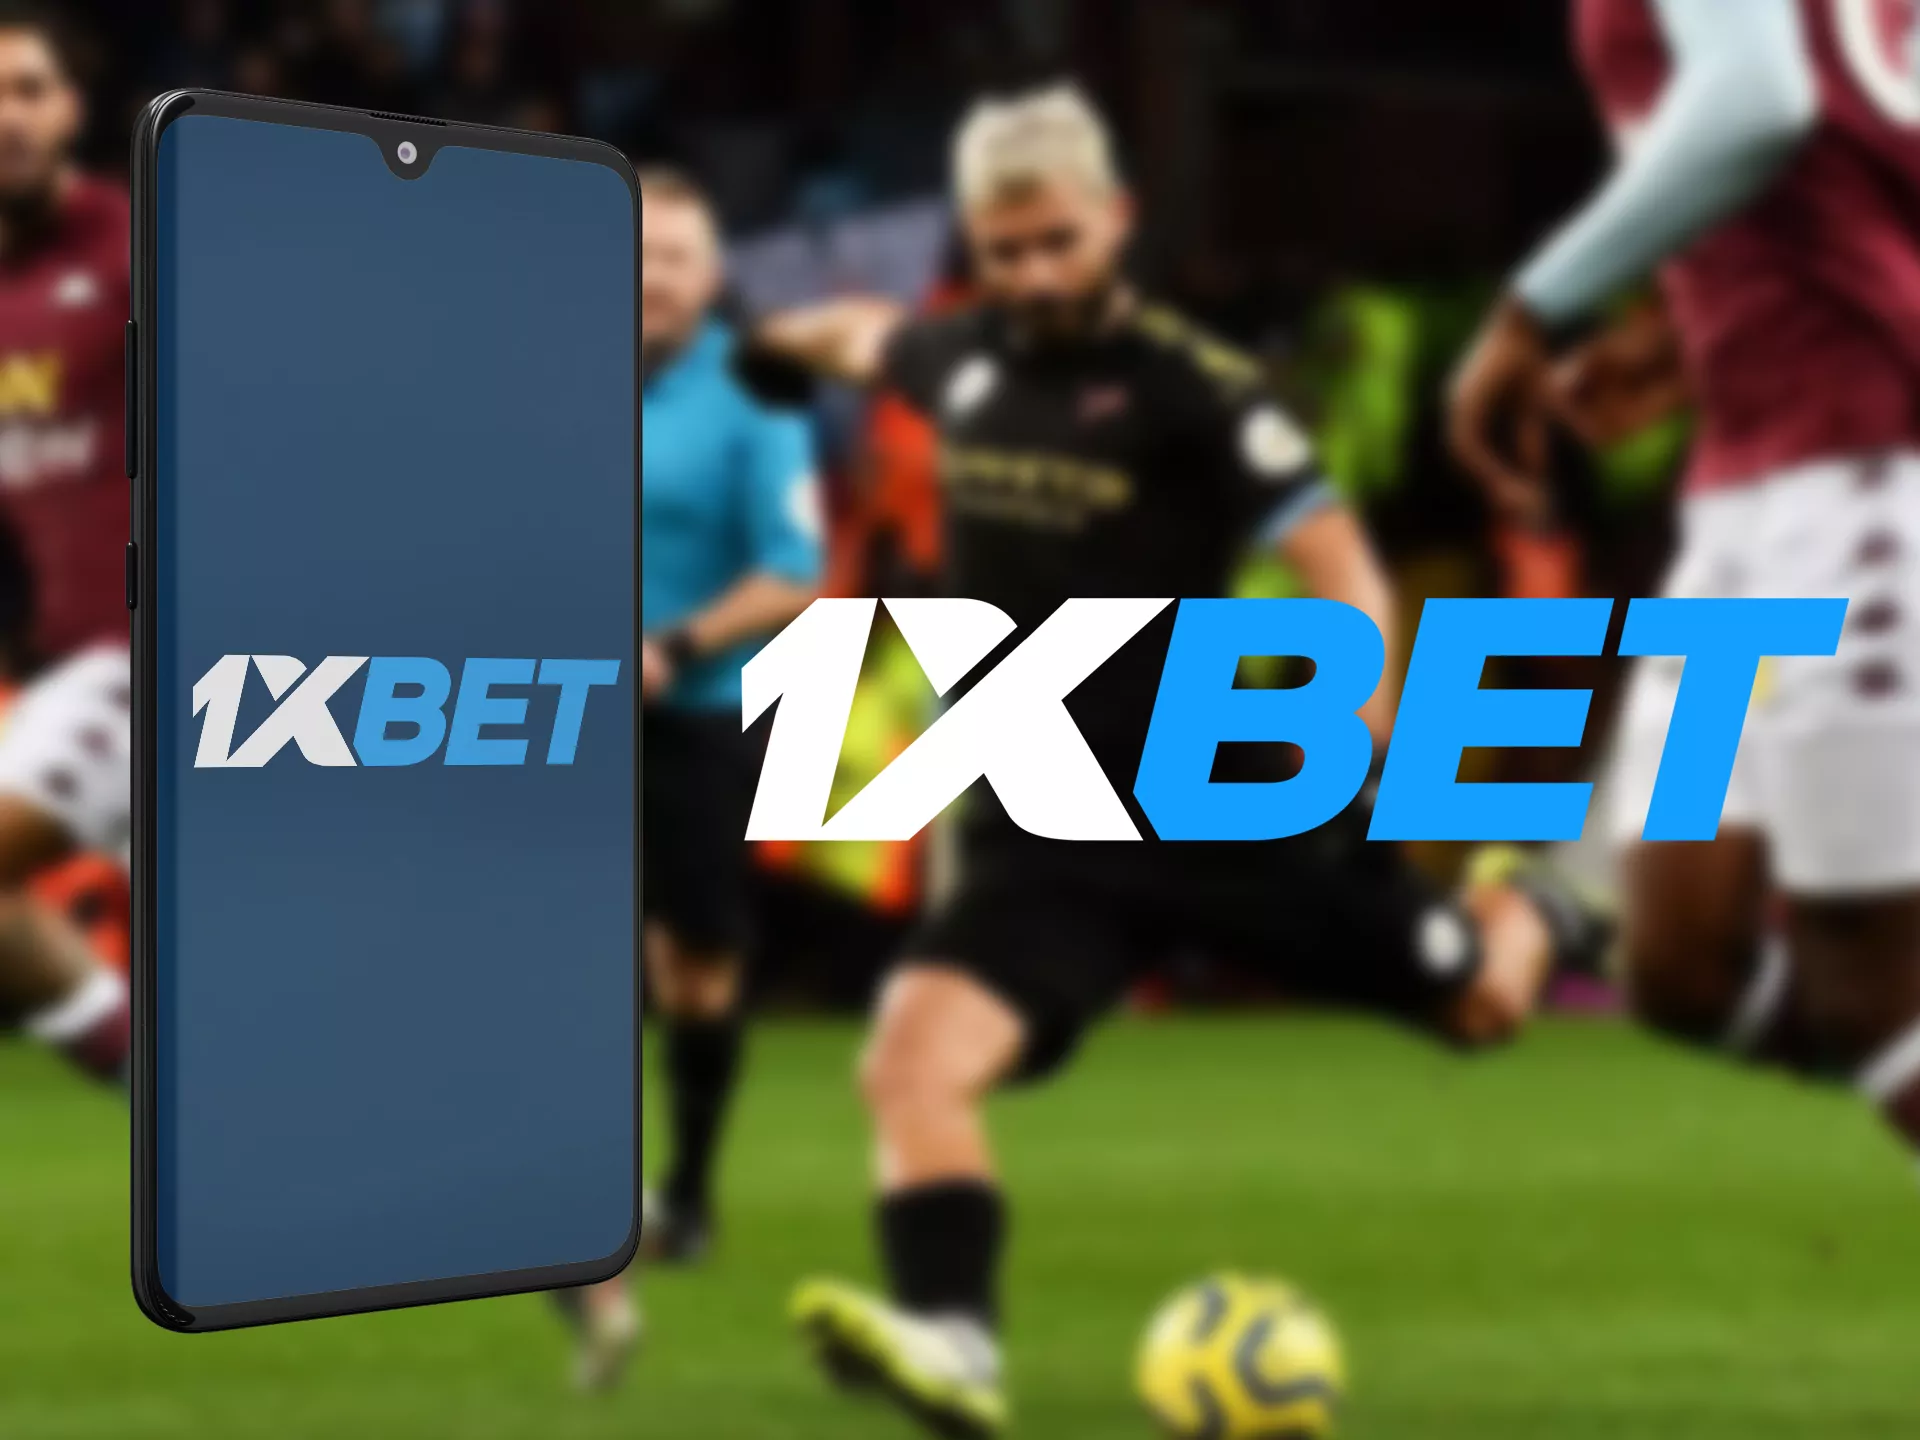 1xbet is a best soccer betting company.